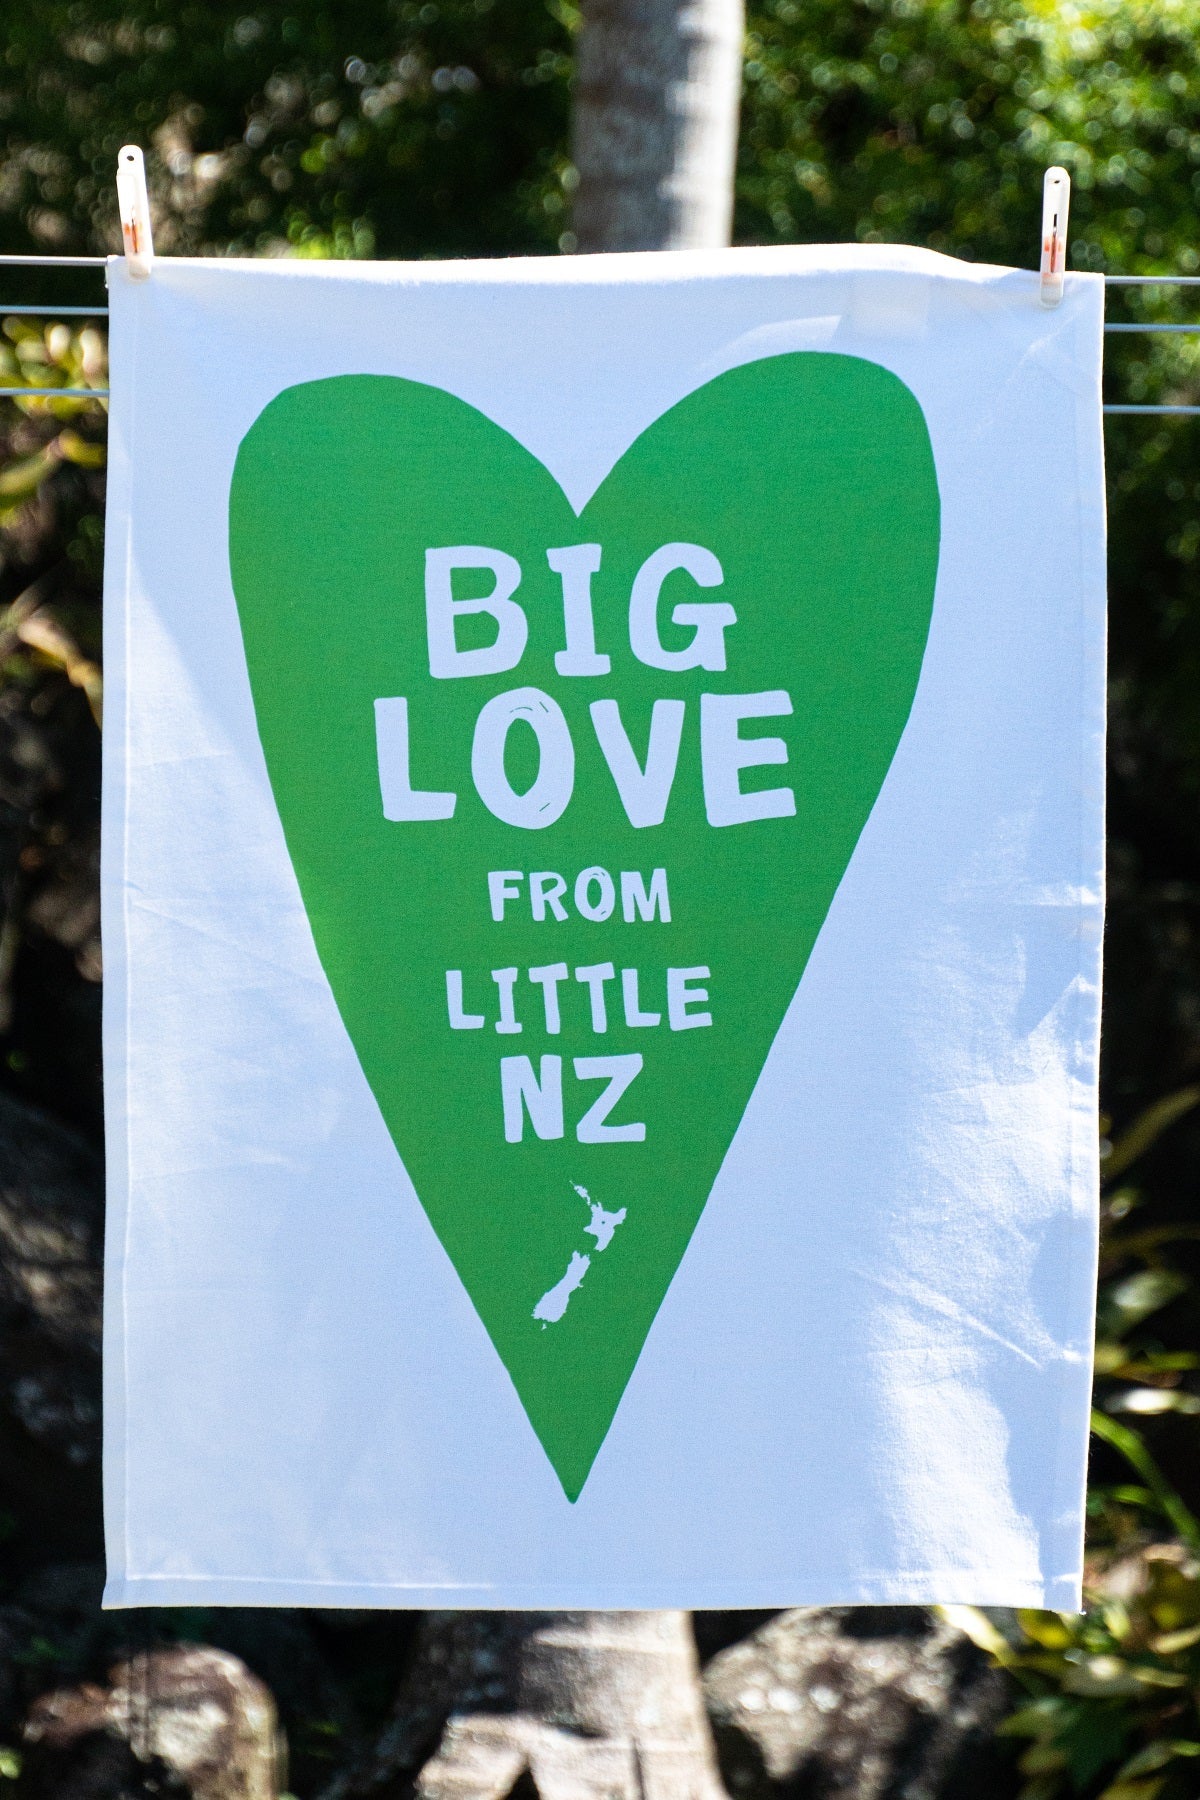 A vibrant, 100% cotton Big Love from little NZ Tea Towel by Tuesday Print with a large green heart and the message "big love from little nz" screenprinted on it, hanging on a clothesline, symbolizing warmth and affection.